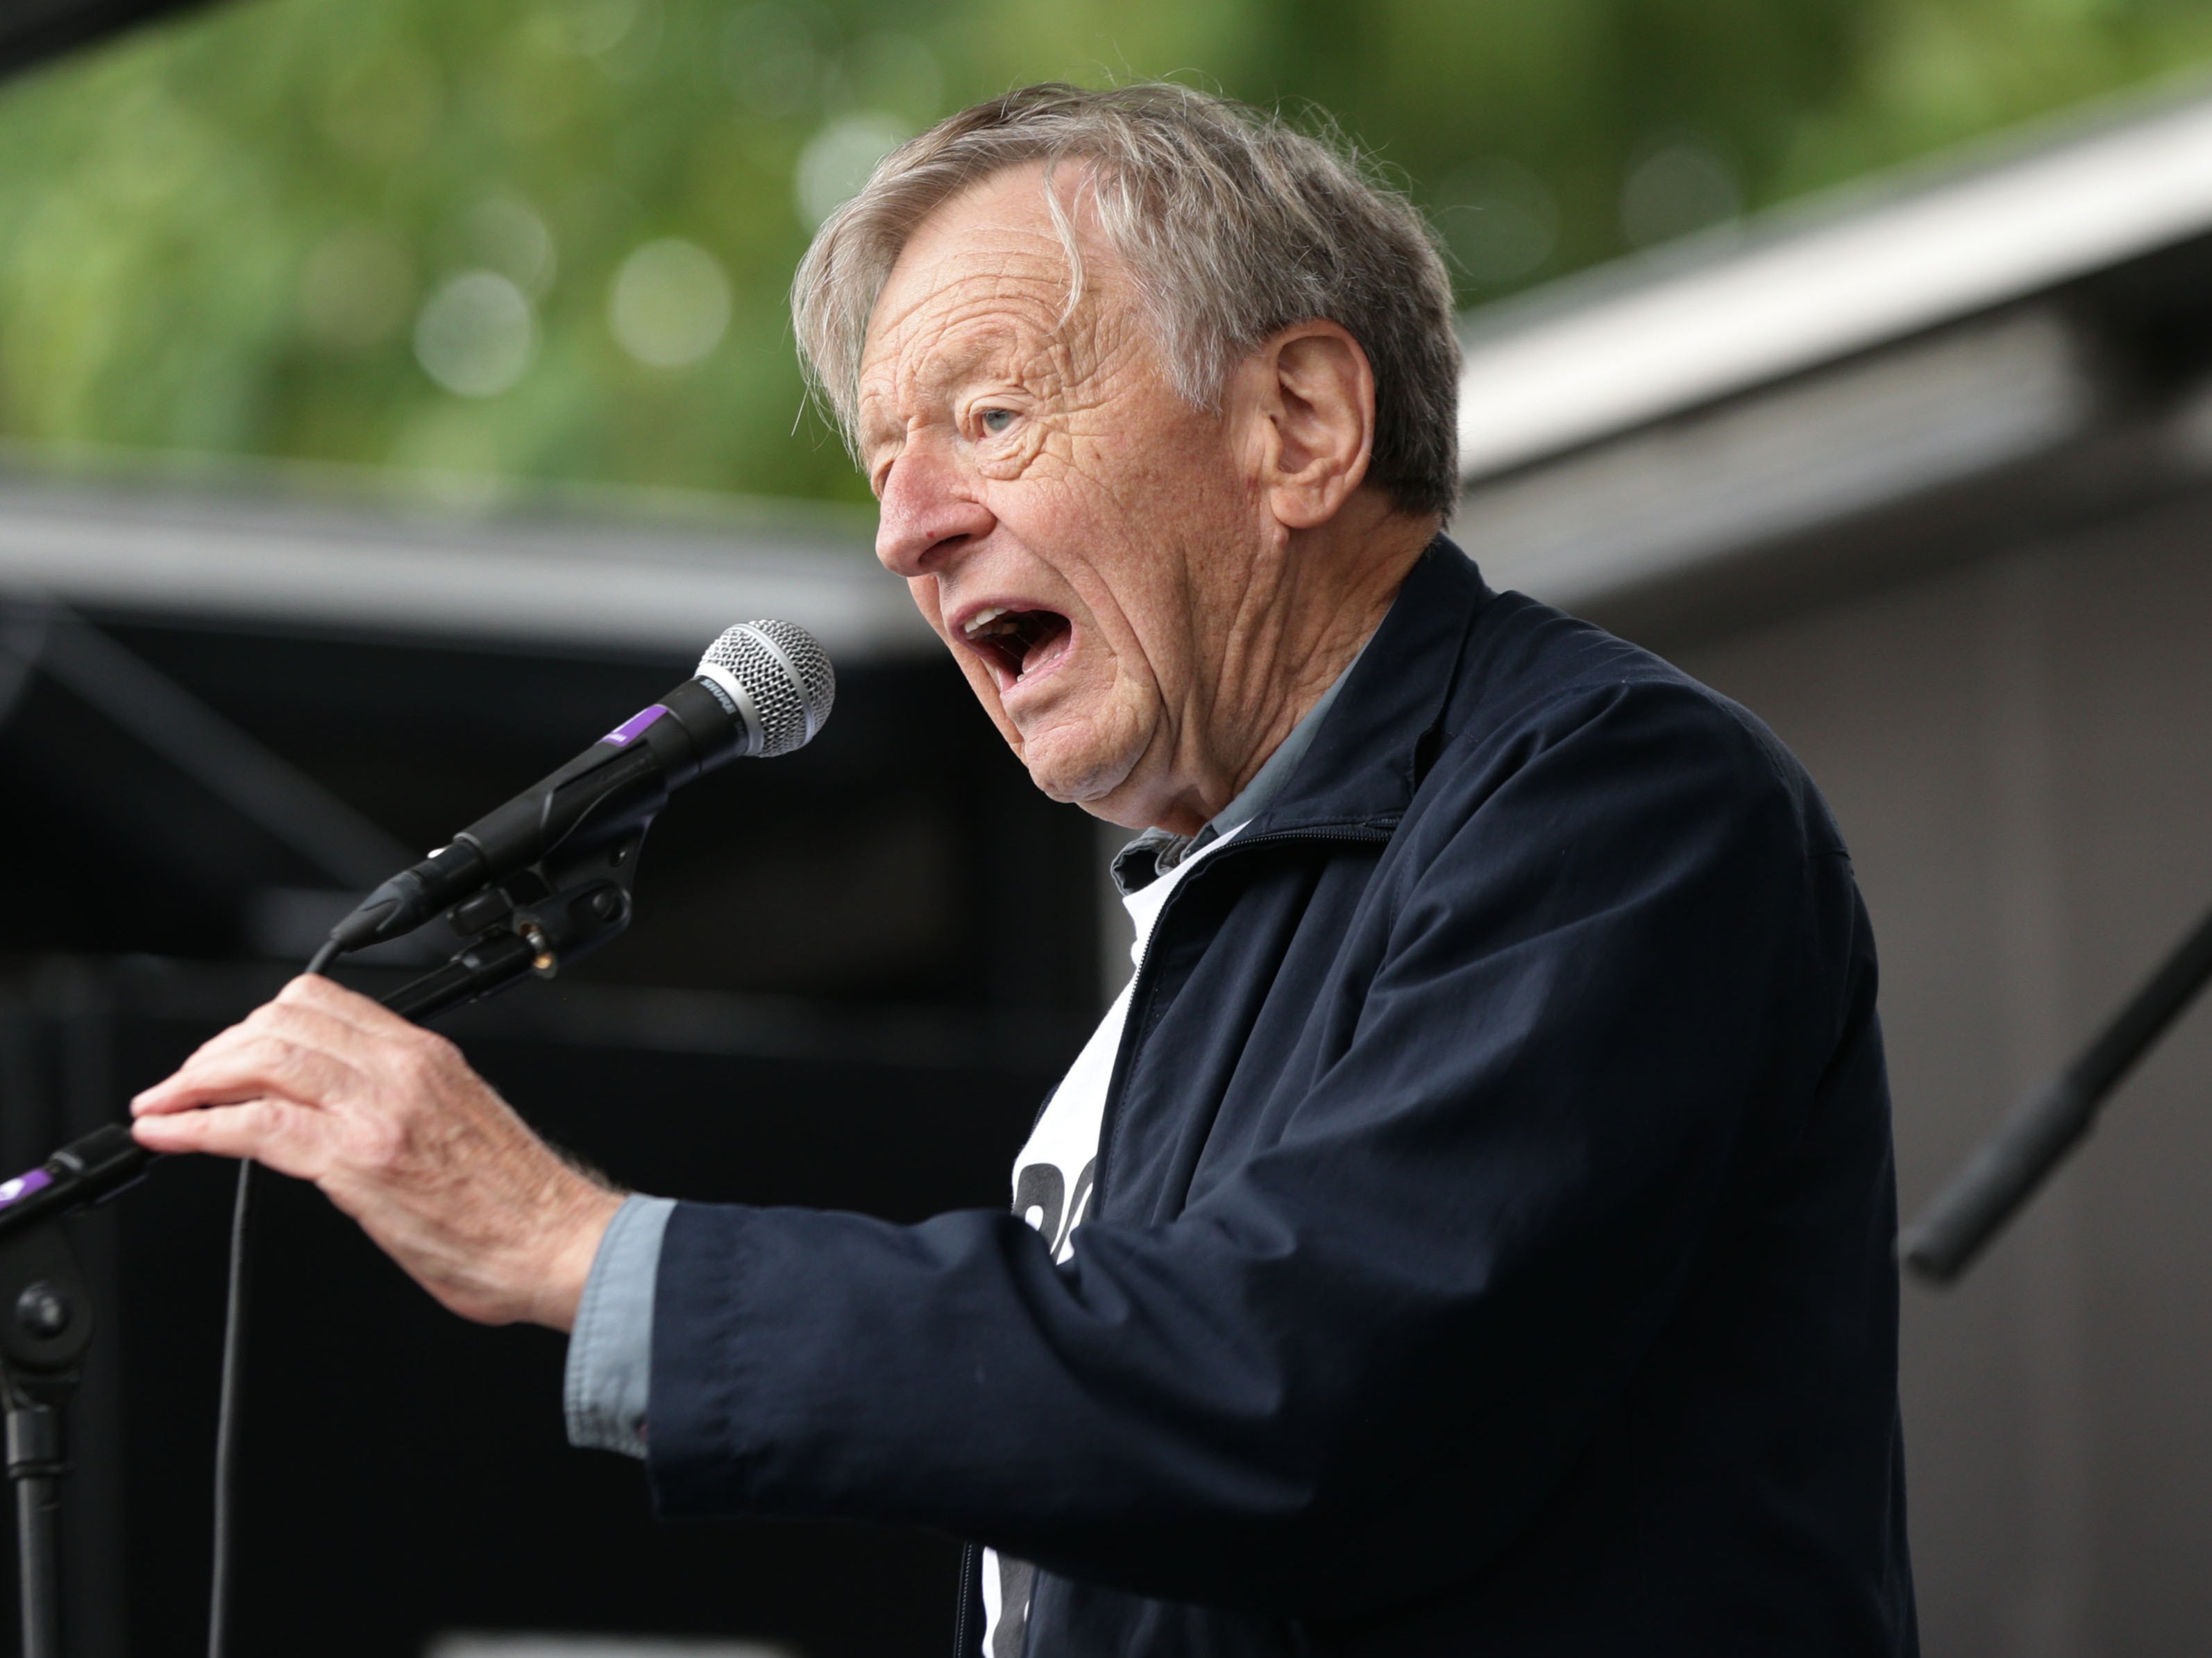 Lord Alf Dubs is veteran campaigner for refugees